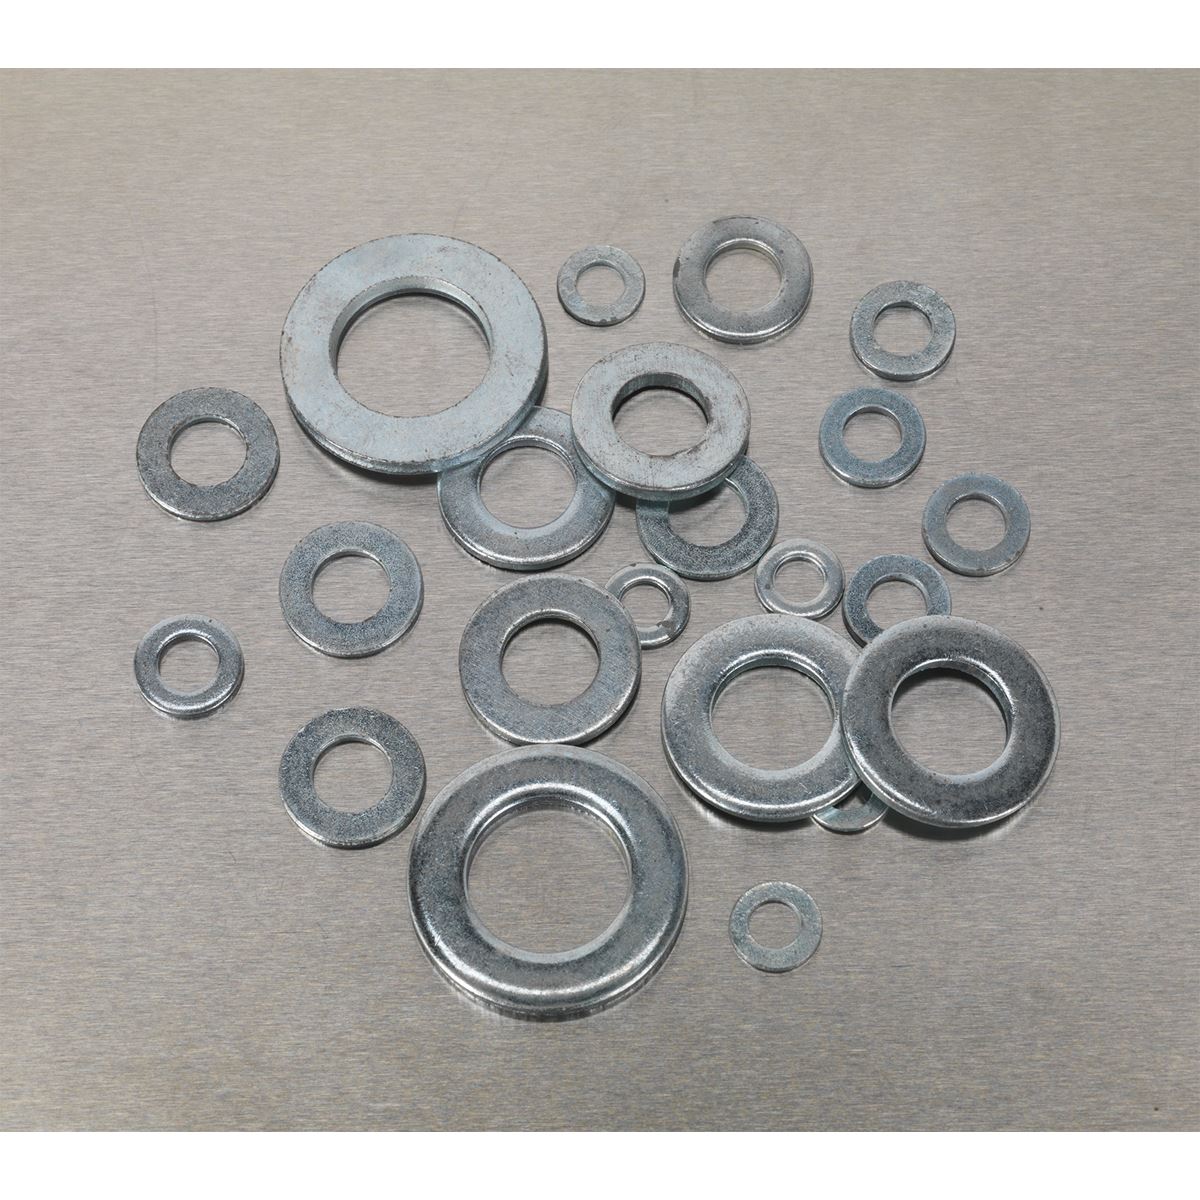 Sealey 1070 Piece Flat Washer Assortment DIN 125 M5-M16 Form A Metric